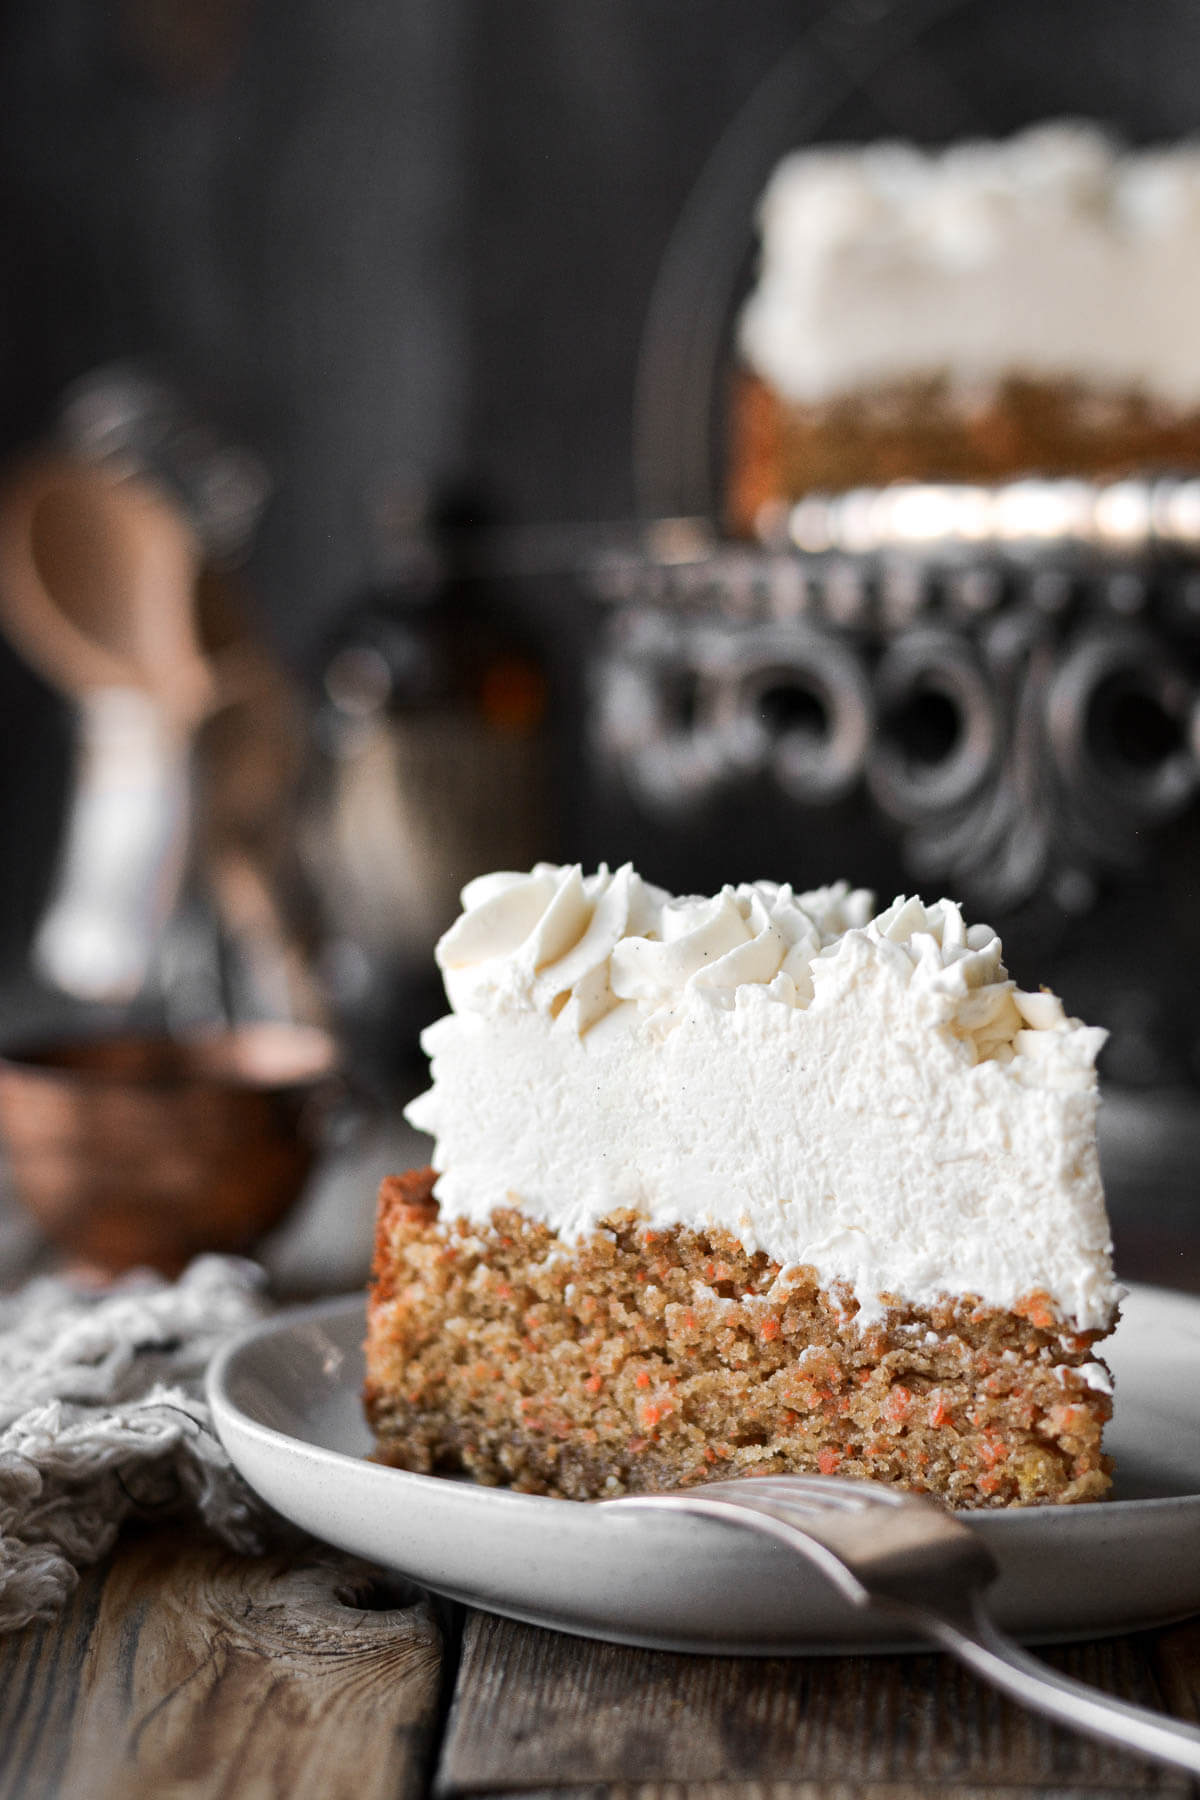 A slice of carrot cake cheesecake on a plate.